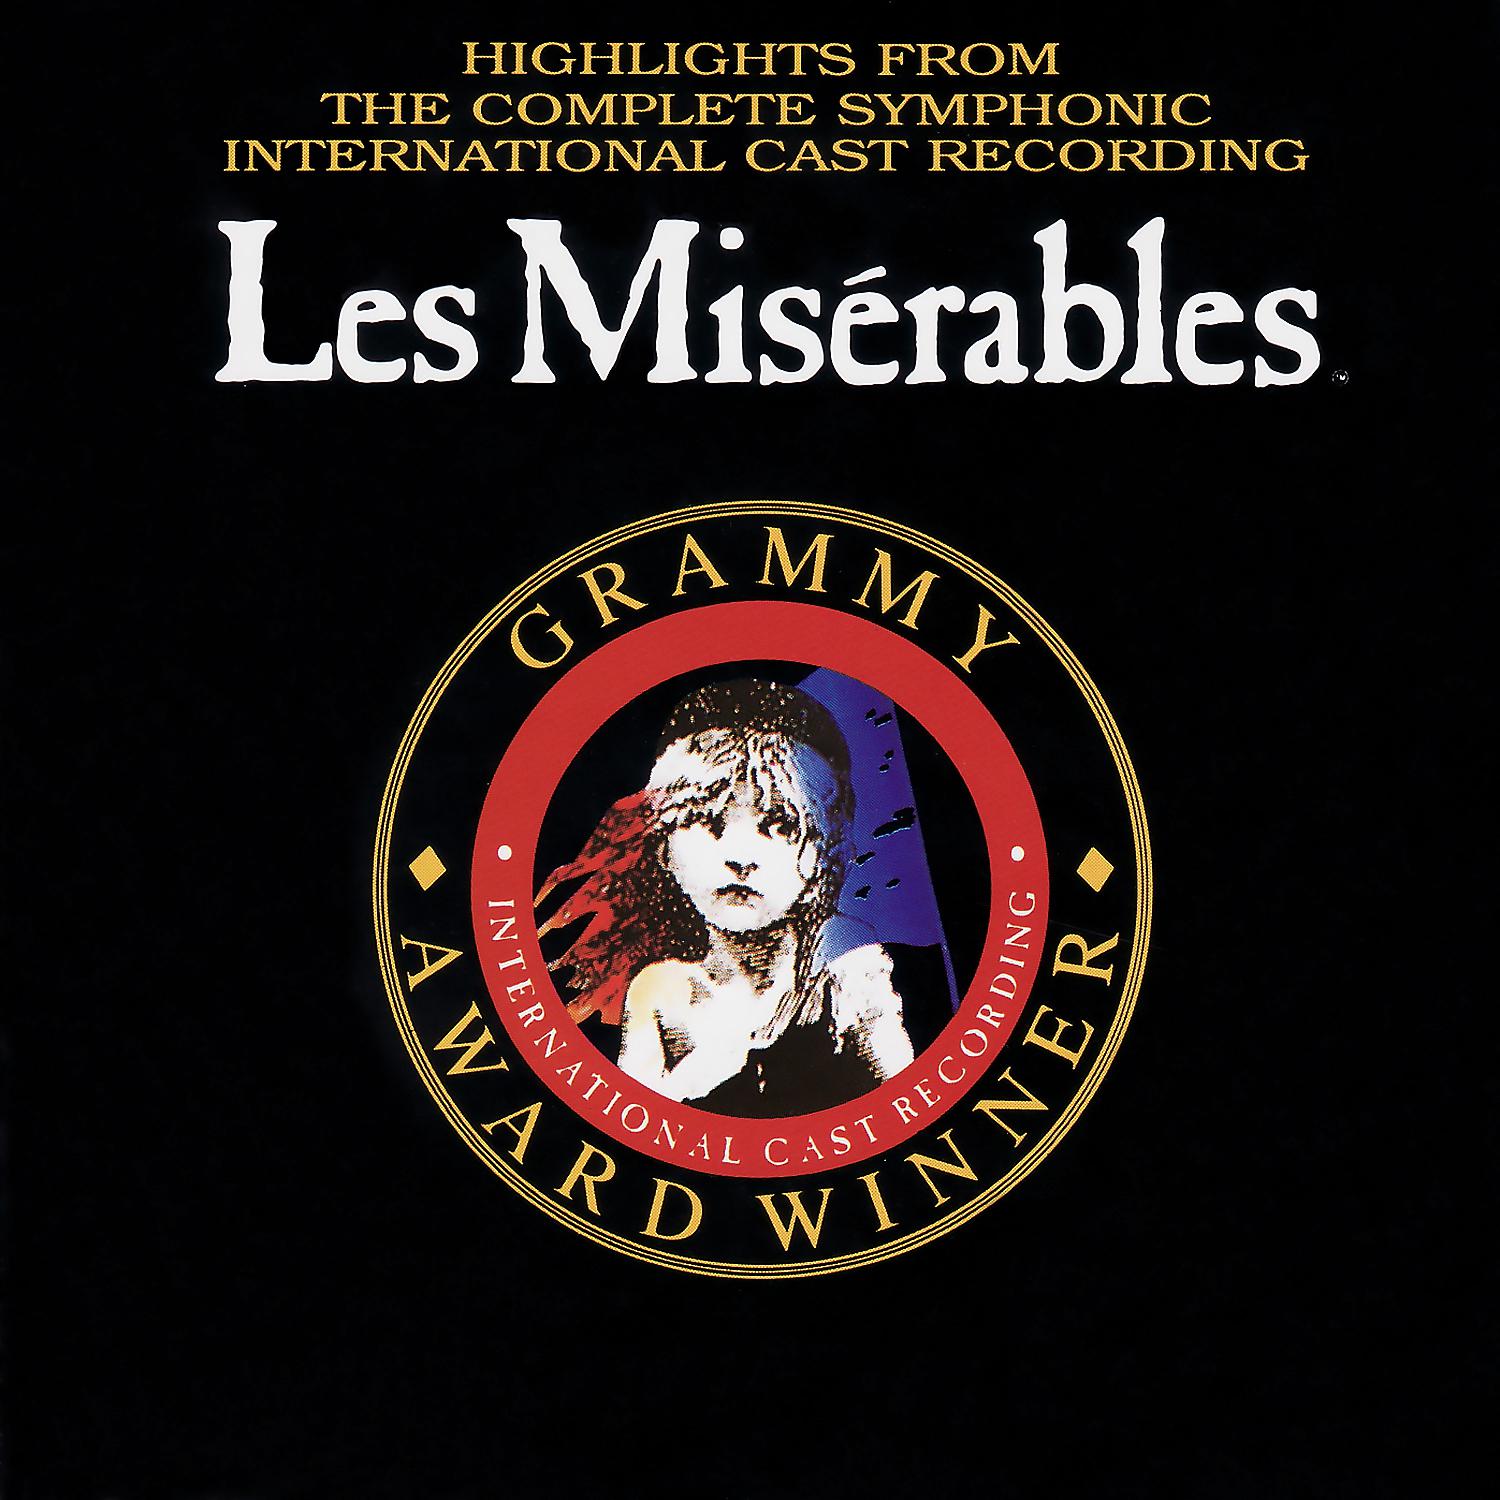 Les Mise rables Highlights from the Complete Symphonic Recording